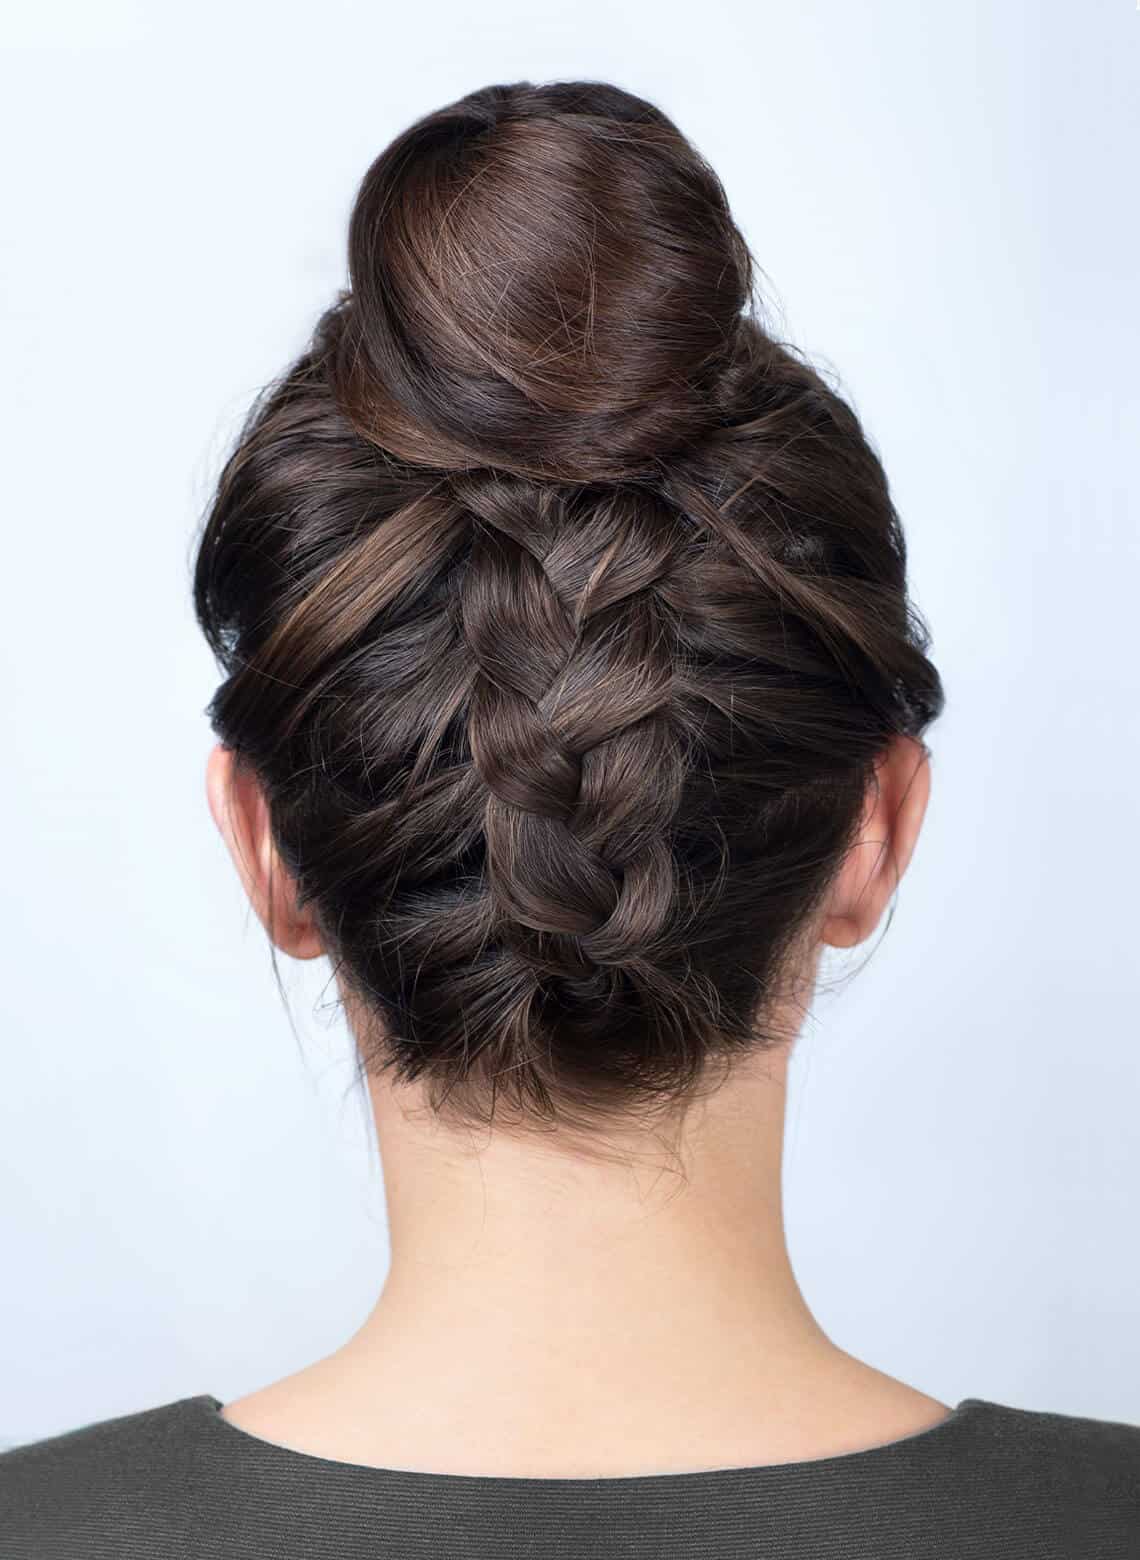 woman with upside down braid